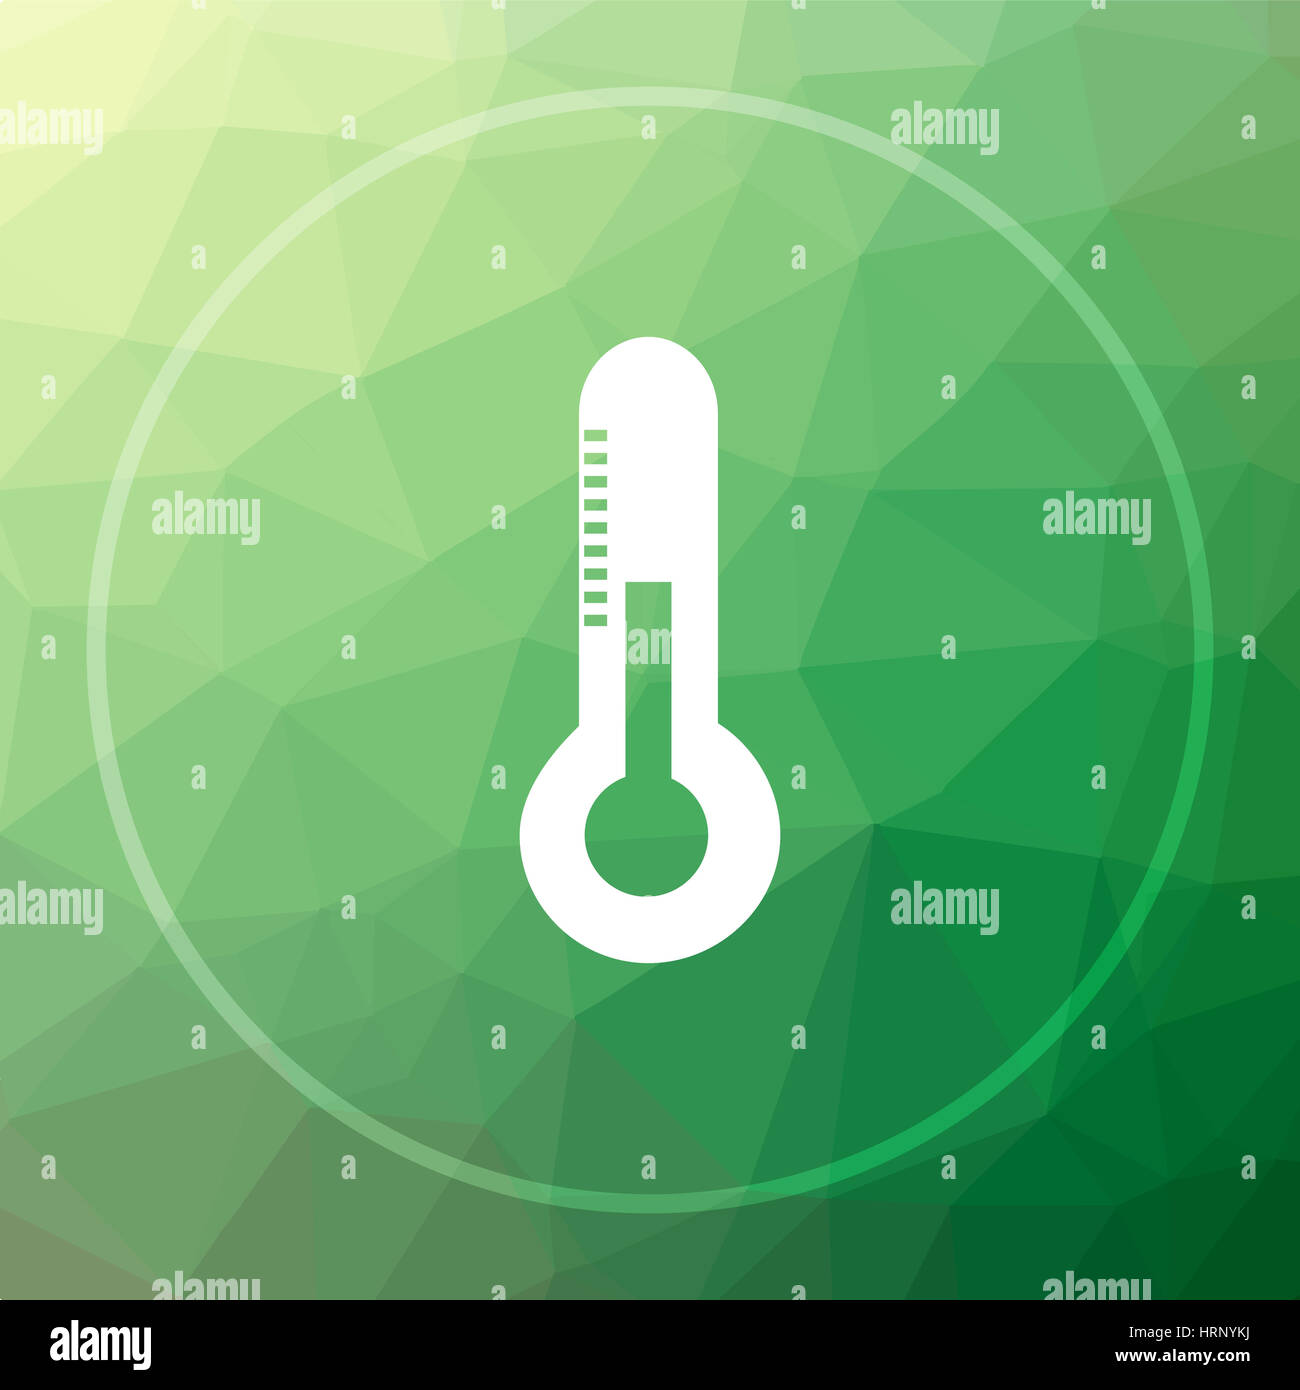 thermometer website